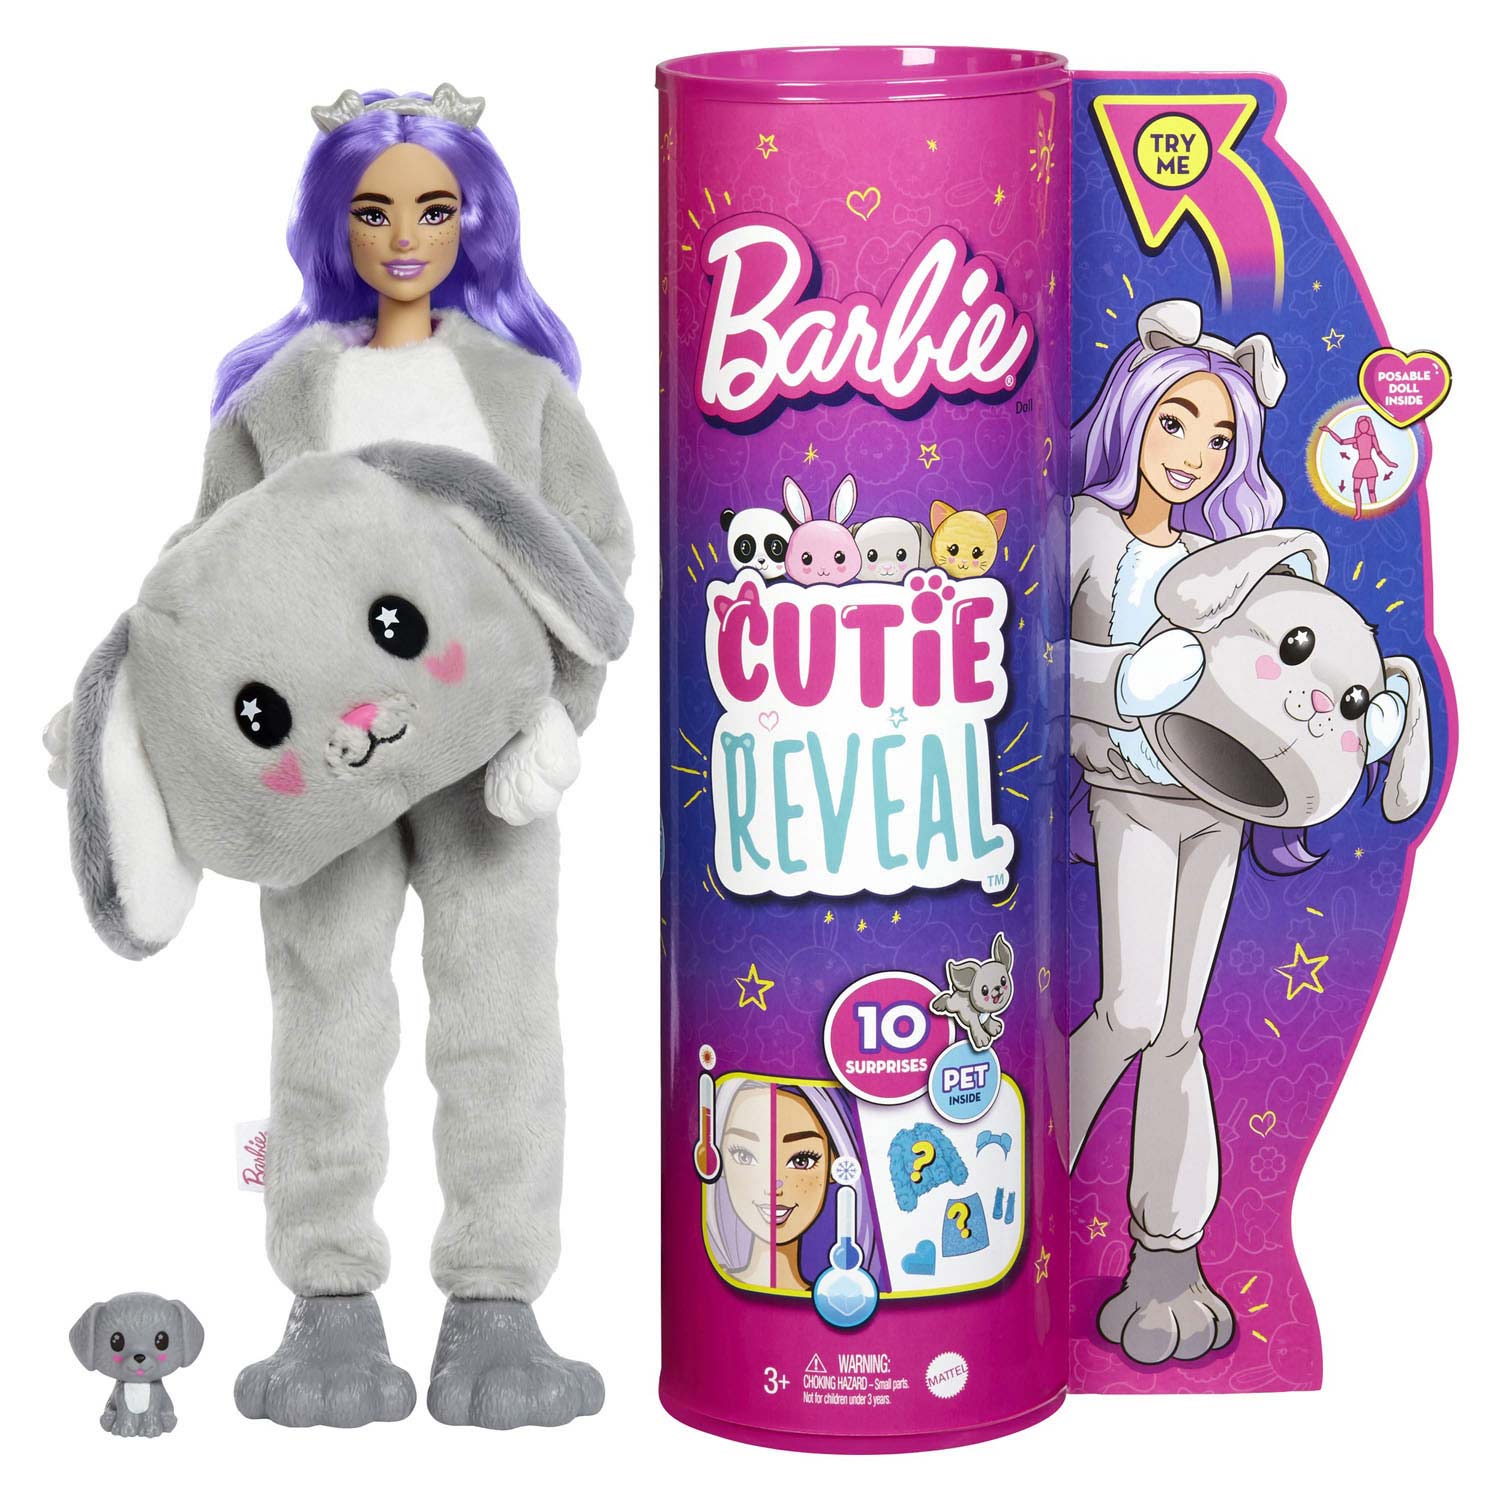 Barbie Cutie Reveal Doll 3 - Puppy | Thimble Toys